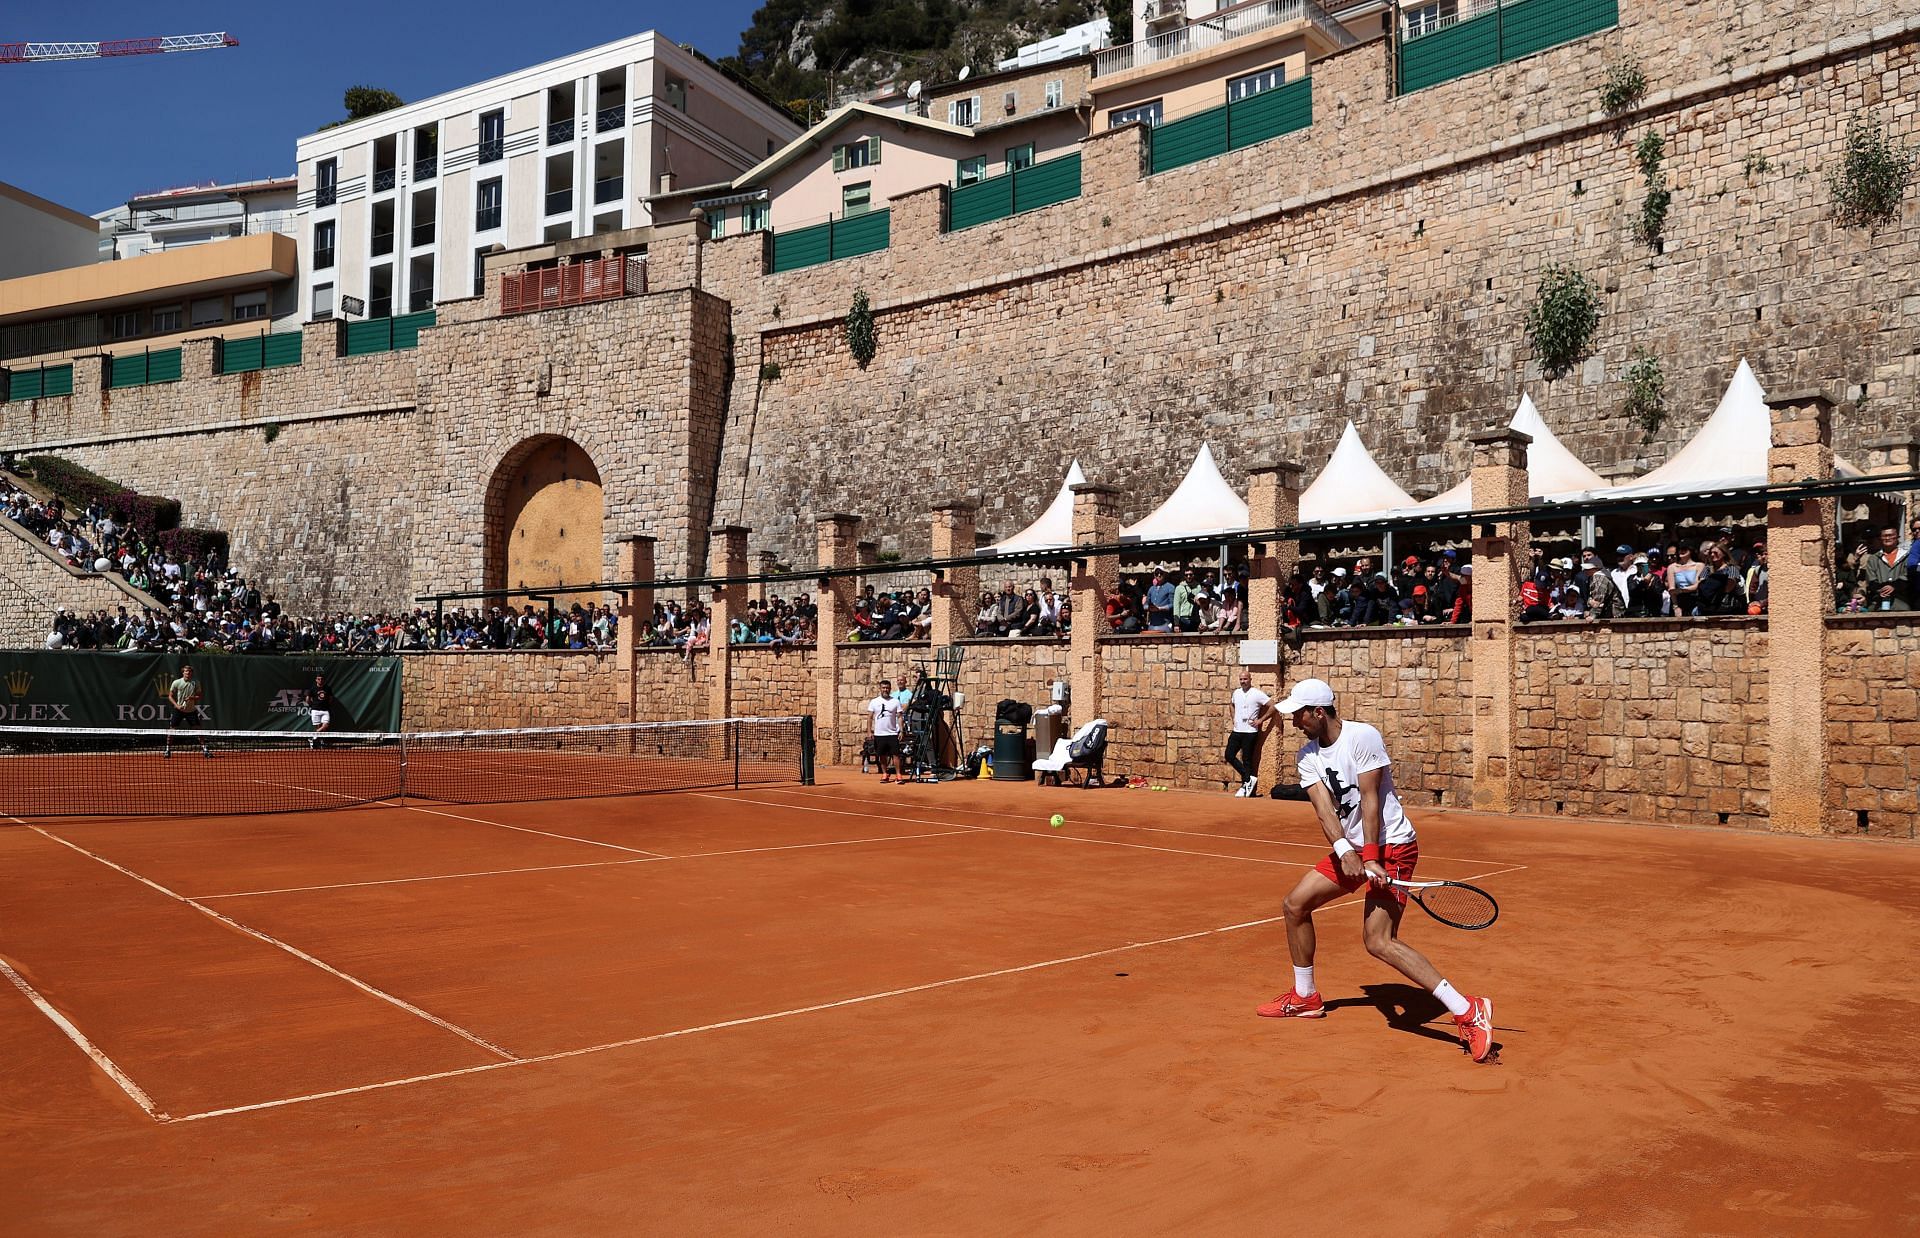 Djokovic at the practice facility ahead of the Rolex Monte-Carlo Masters